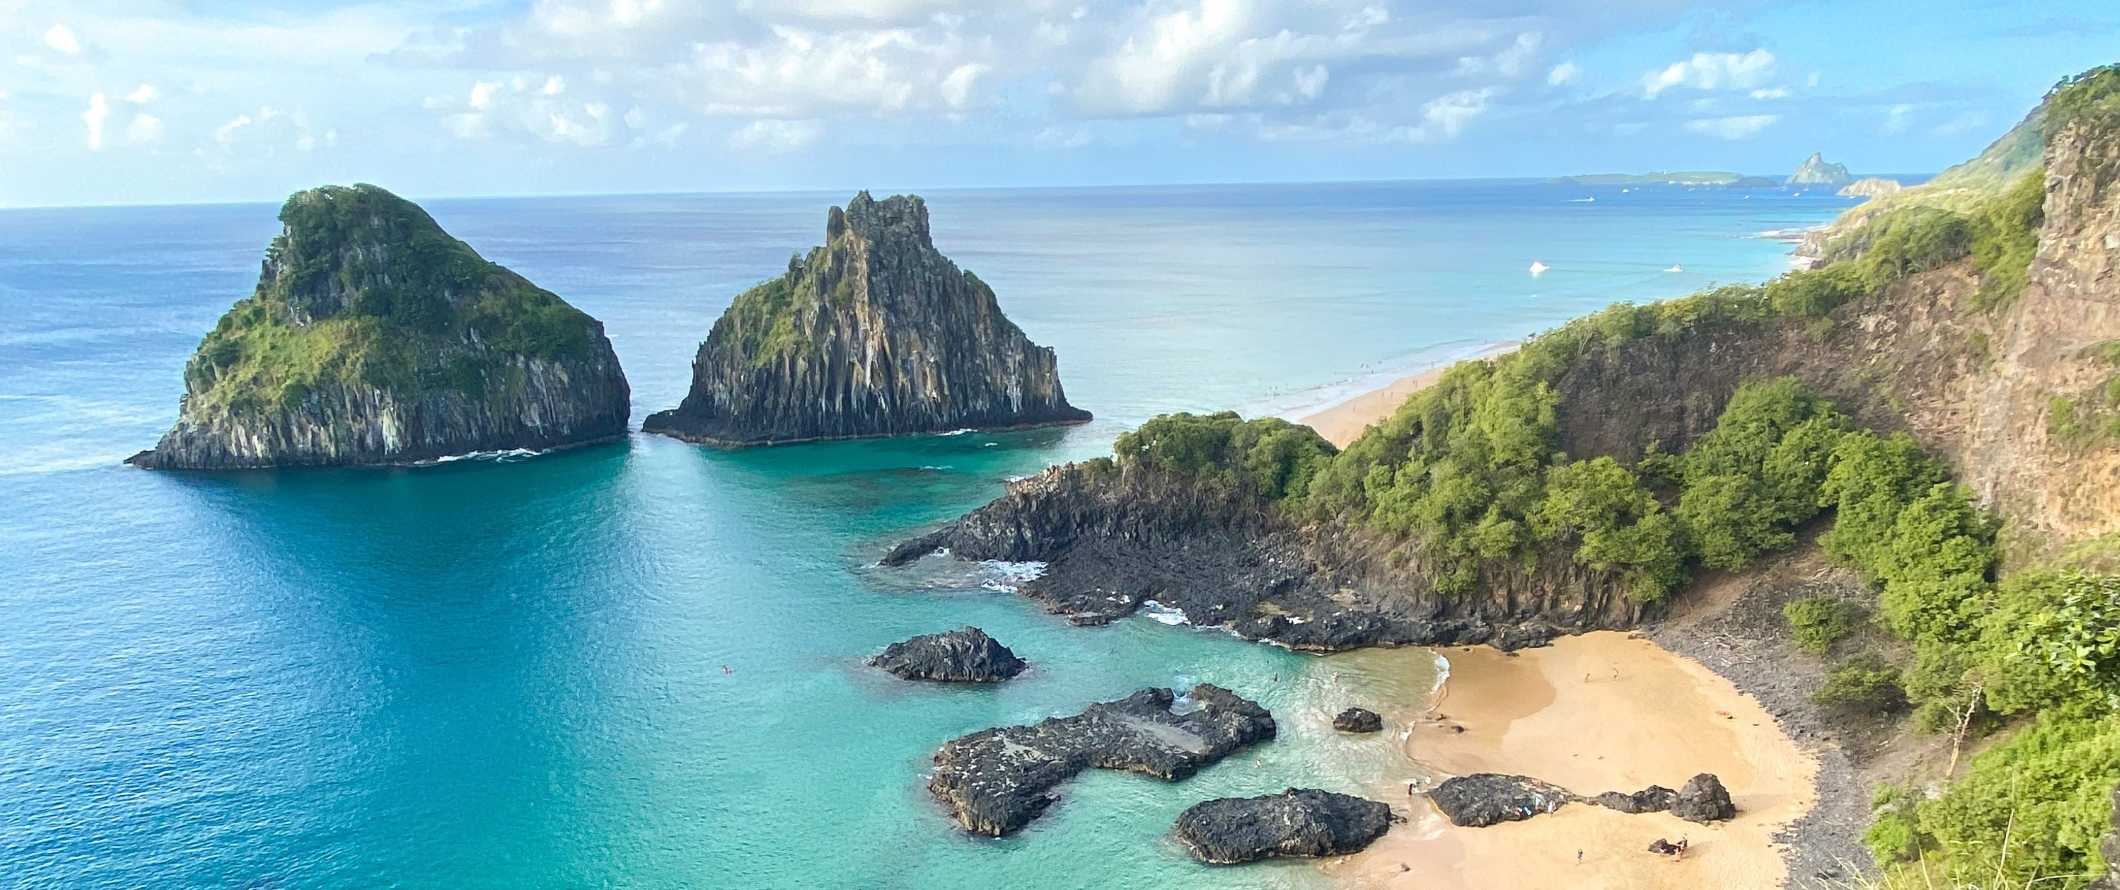 Panoramic view of beach and two large rock formations rising out of the turquoise waters of Fernando de Noronha, Brazil